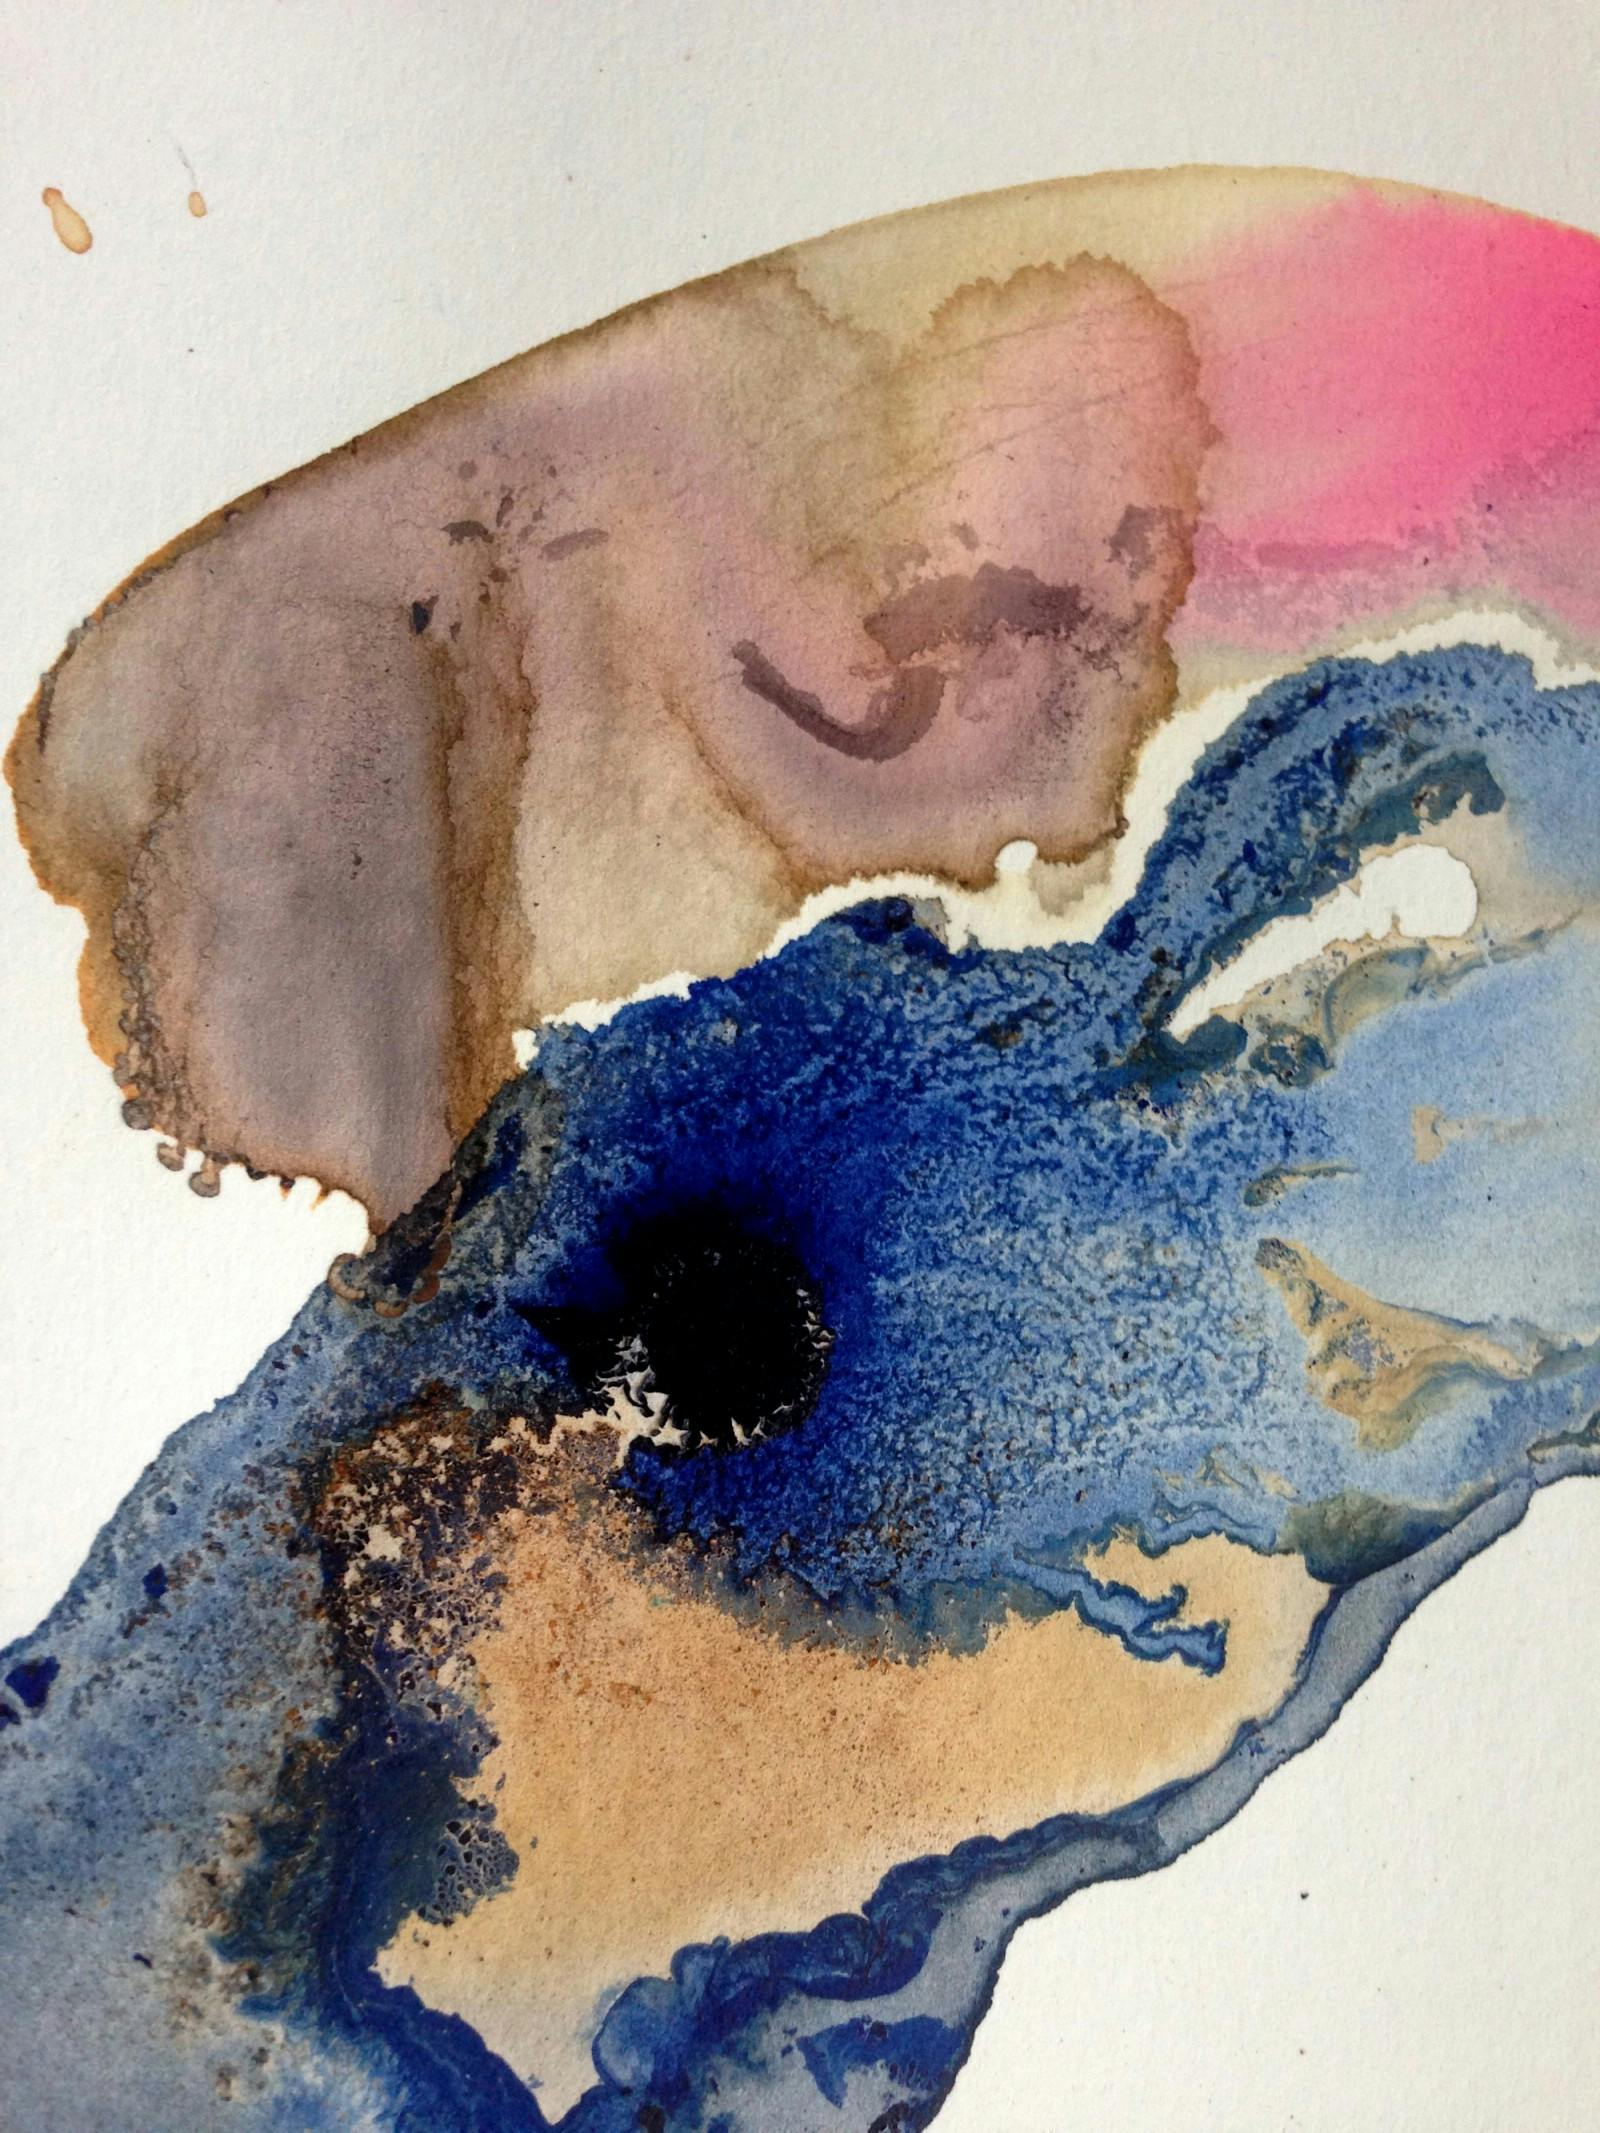 An abstract painting with spilt-ink-like colors. Blue, brown, and pink.